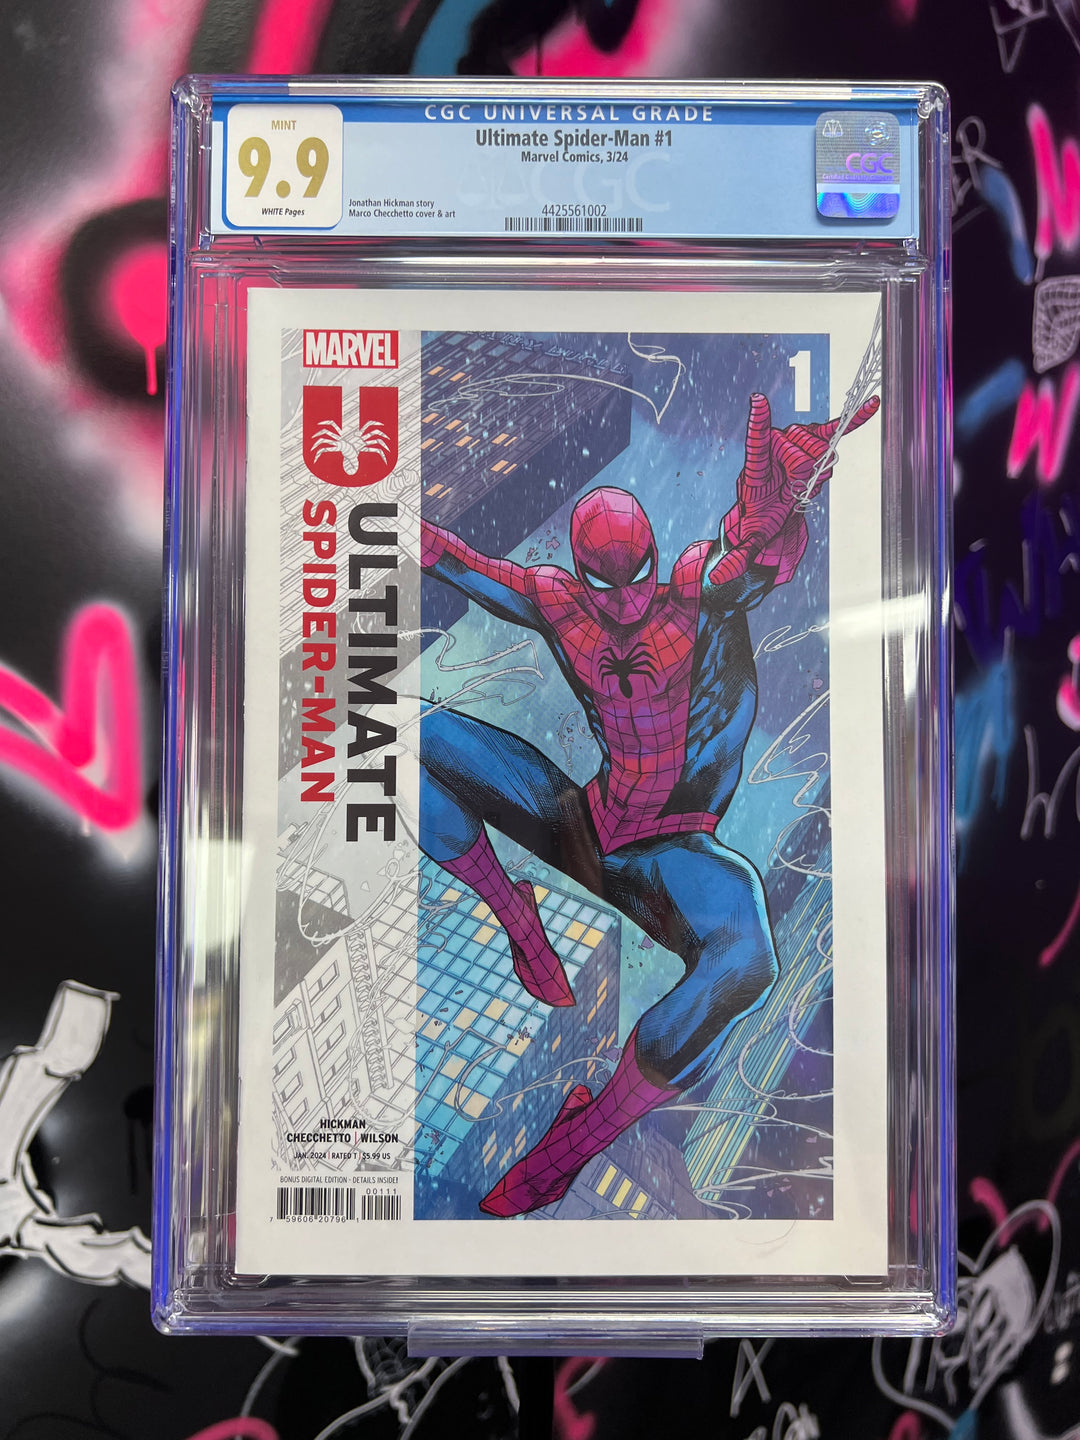 ULTIMATE SPIDER-MAN #1 FIRST PRINT CGC 9.9